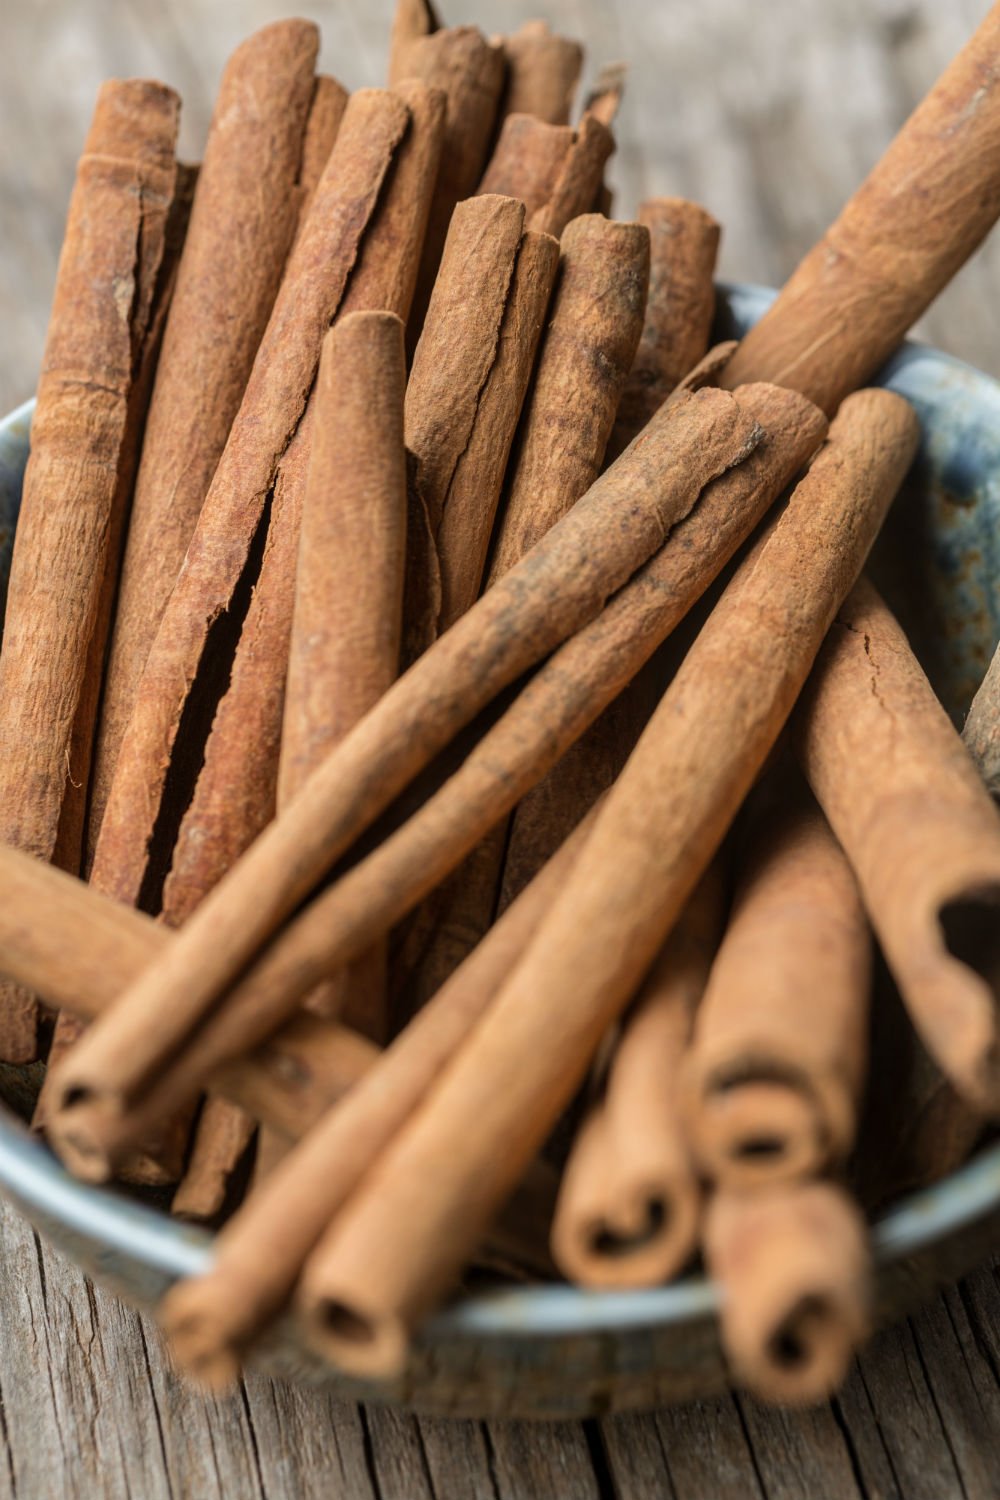 5 Health Benefits of Cinnamon to Spice up your life | SPUD.ca